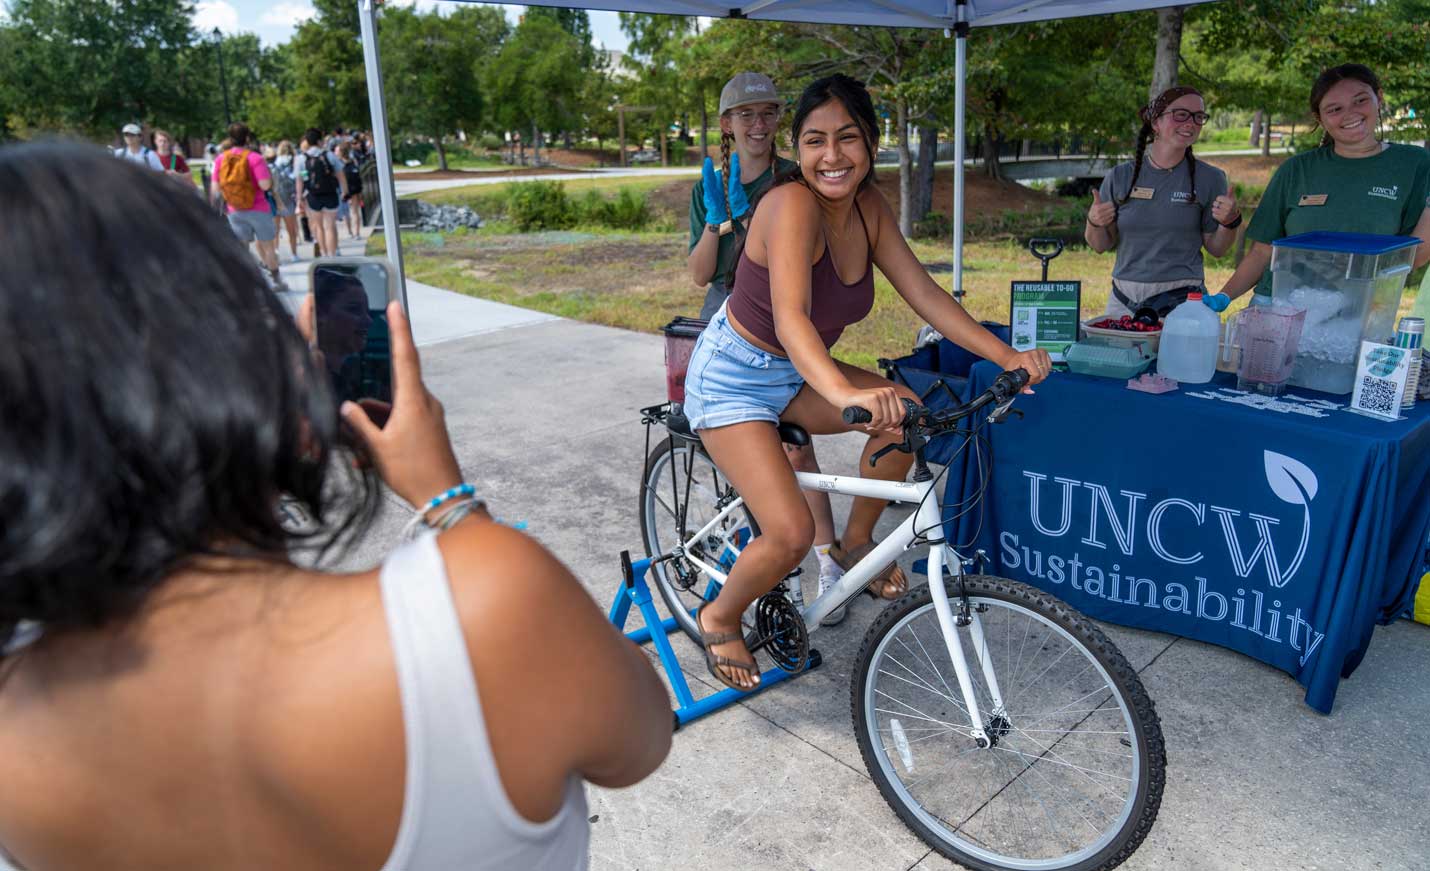 A female presenting person rides a bike with a blender on the back in front of an outreach table. 